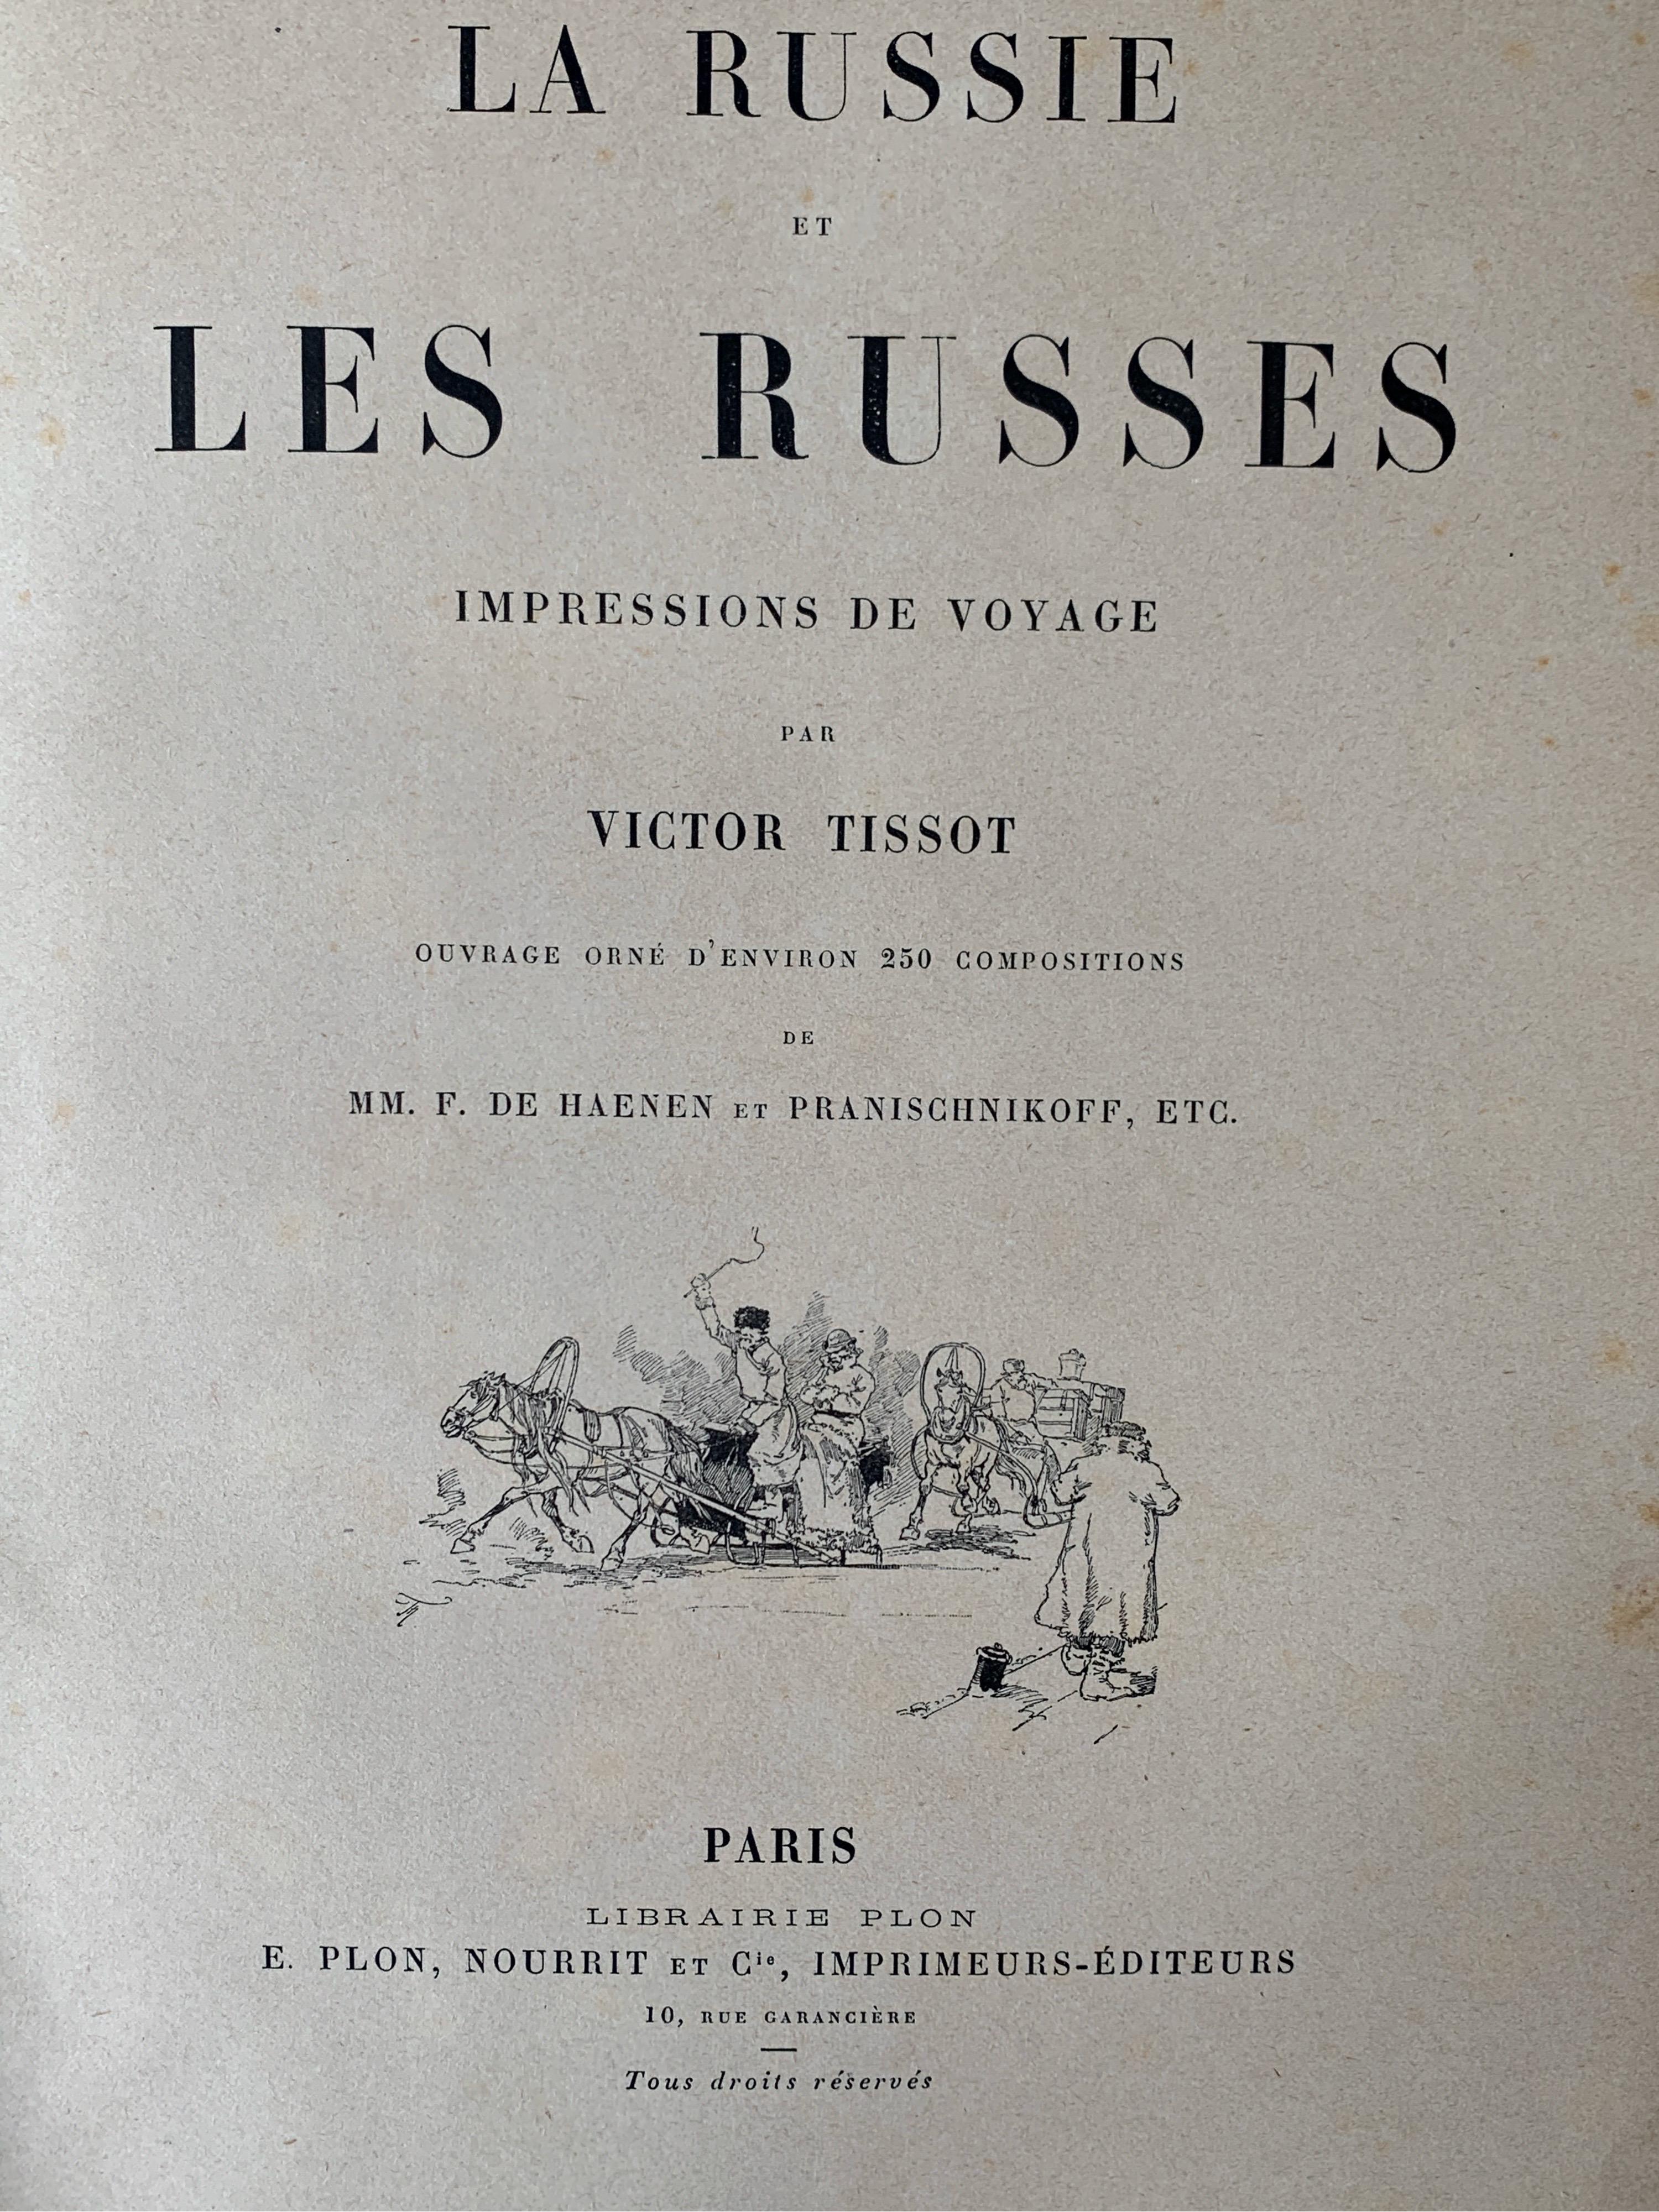 Machine-Made Great Voyage from Kiev to Moscow, La Russie et les Russes by V.Tissot, 1892